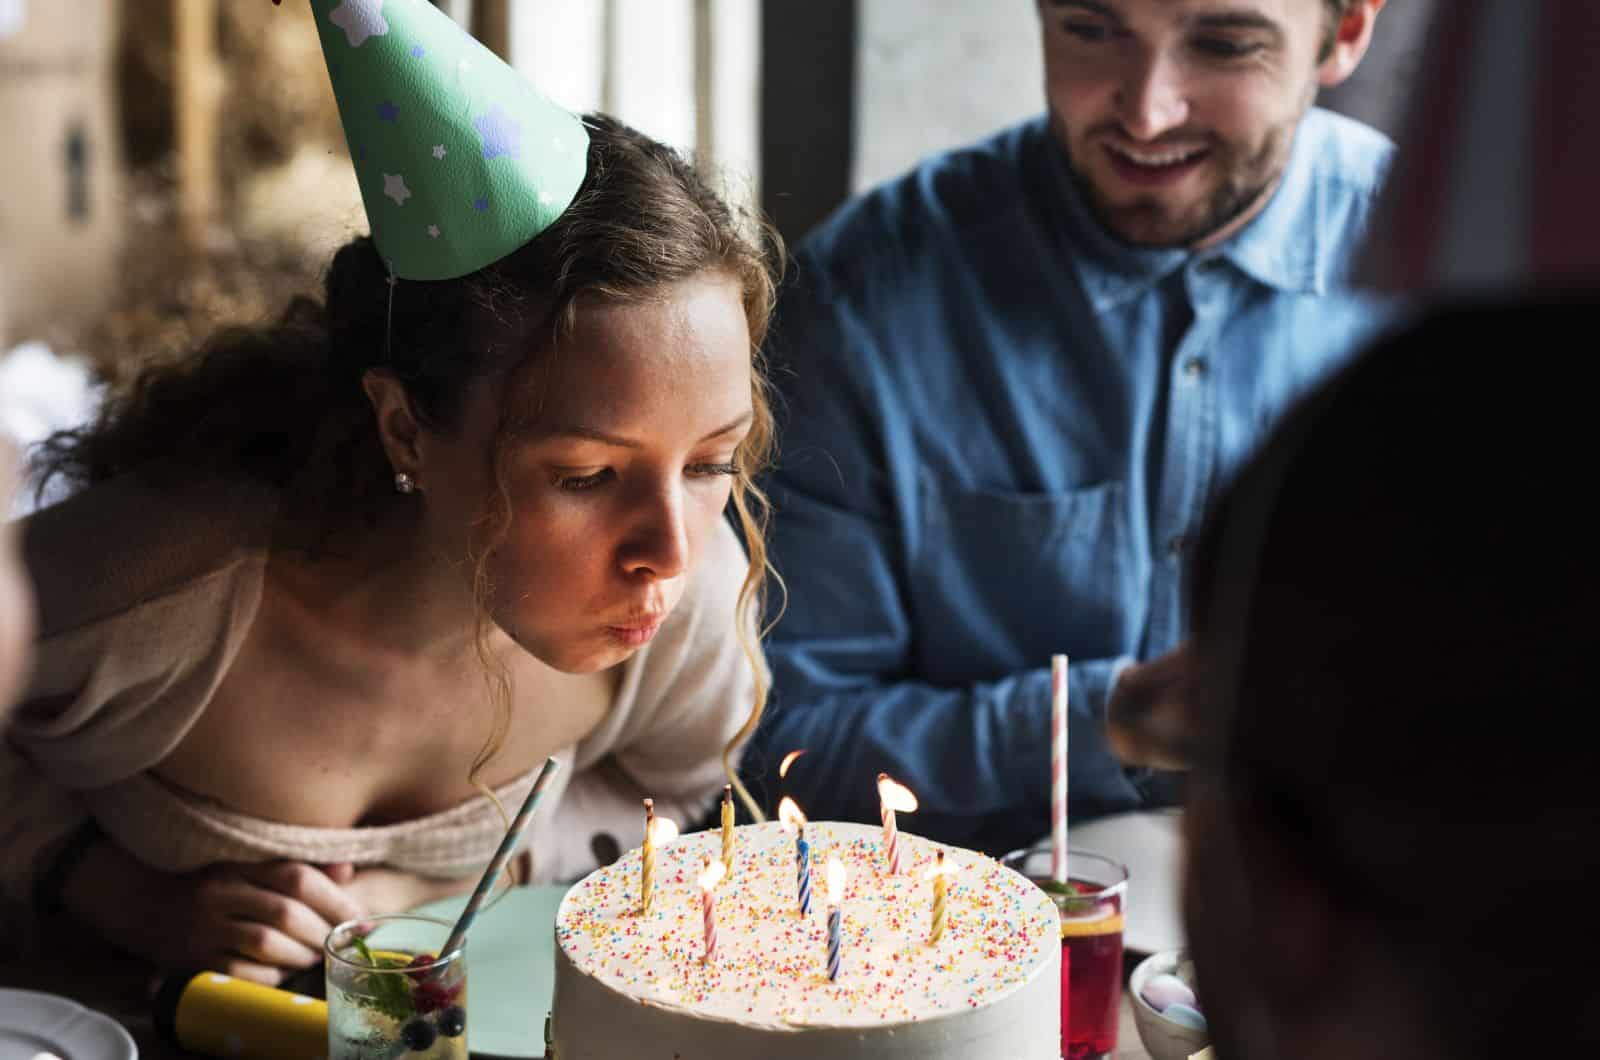 3 Tips To Make Your Daughter's Birthday Special